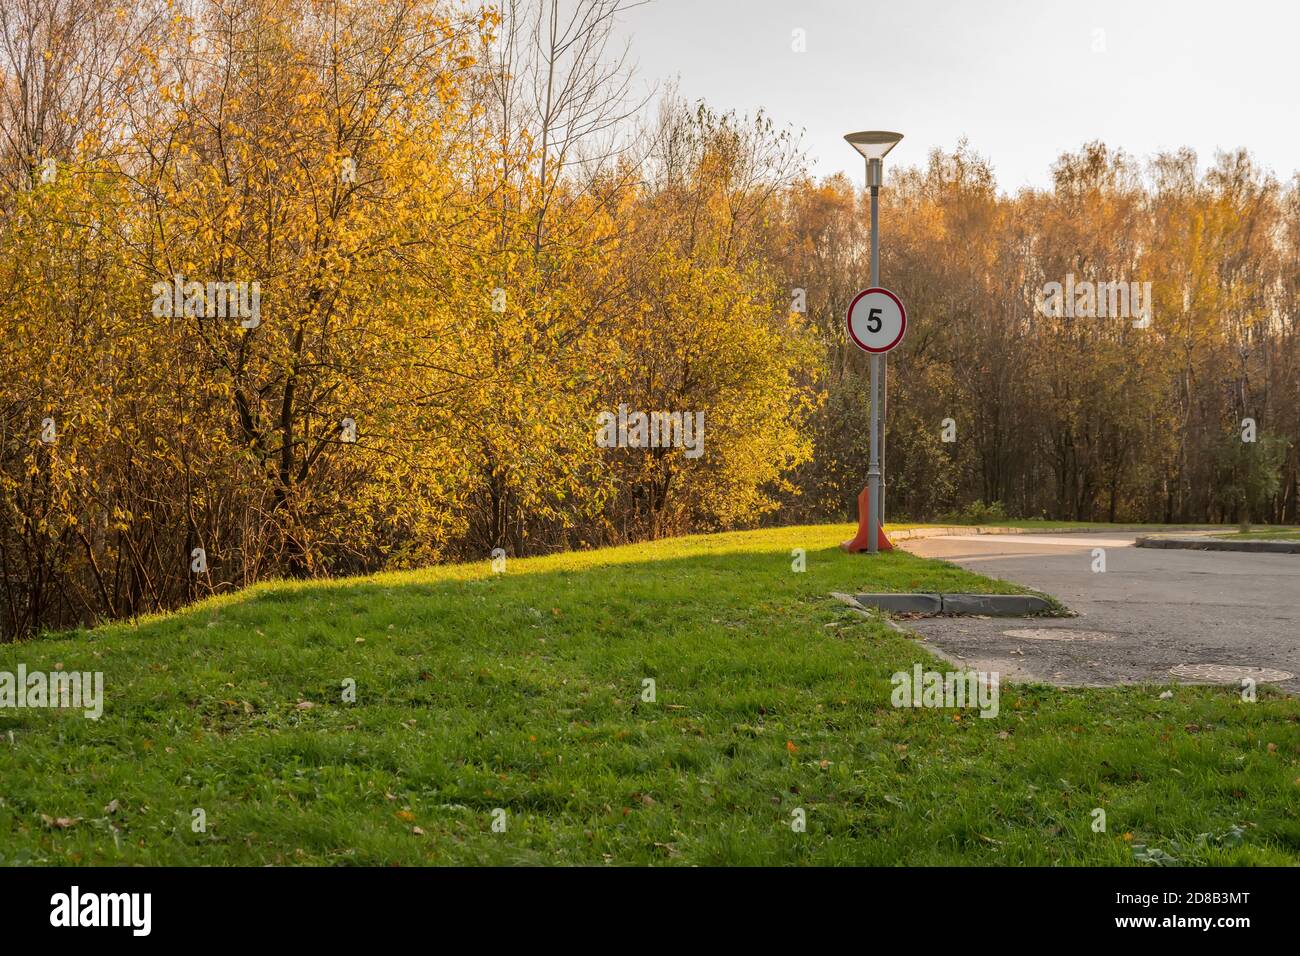 Road sign near a lantern on a background of an autumn yellow forest with the number pa, autumn meadow, green grass bright sunlight asphalt road in the Stock Photo